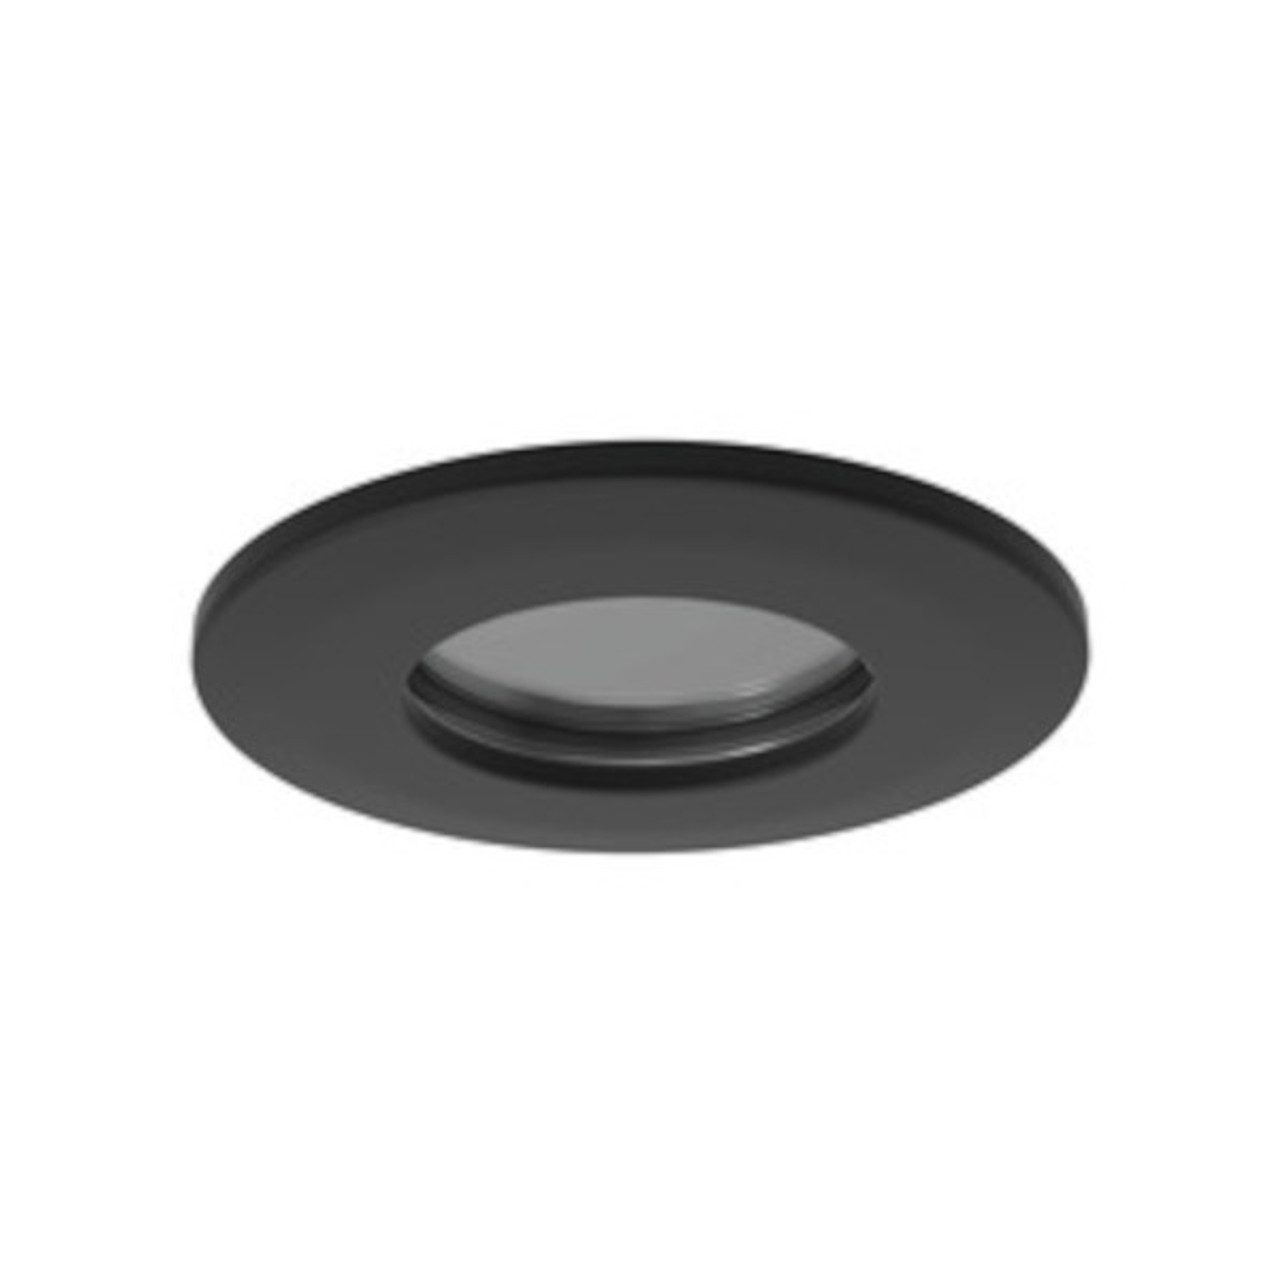 Kosnic Aliso Fixed IP65 Fire Rated Downlight for GU10 in Black (no lamp)